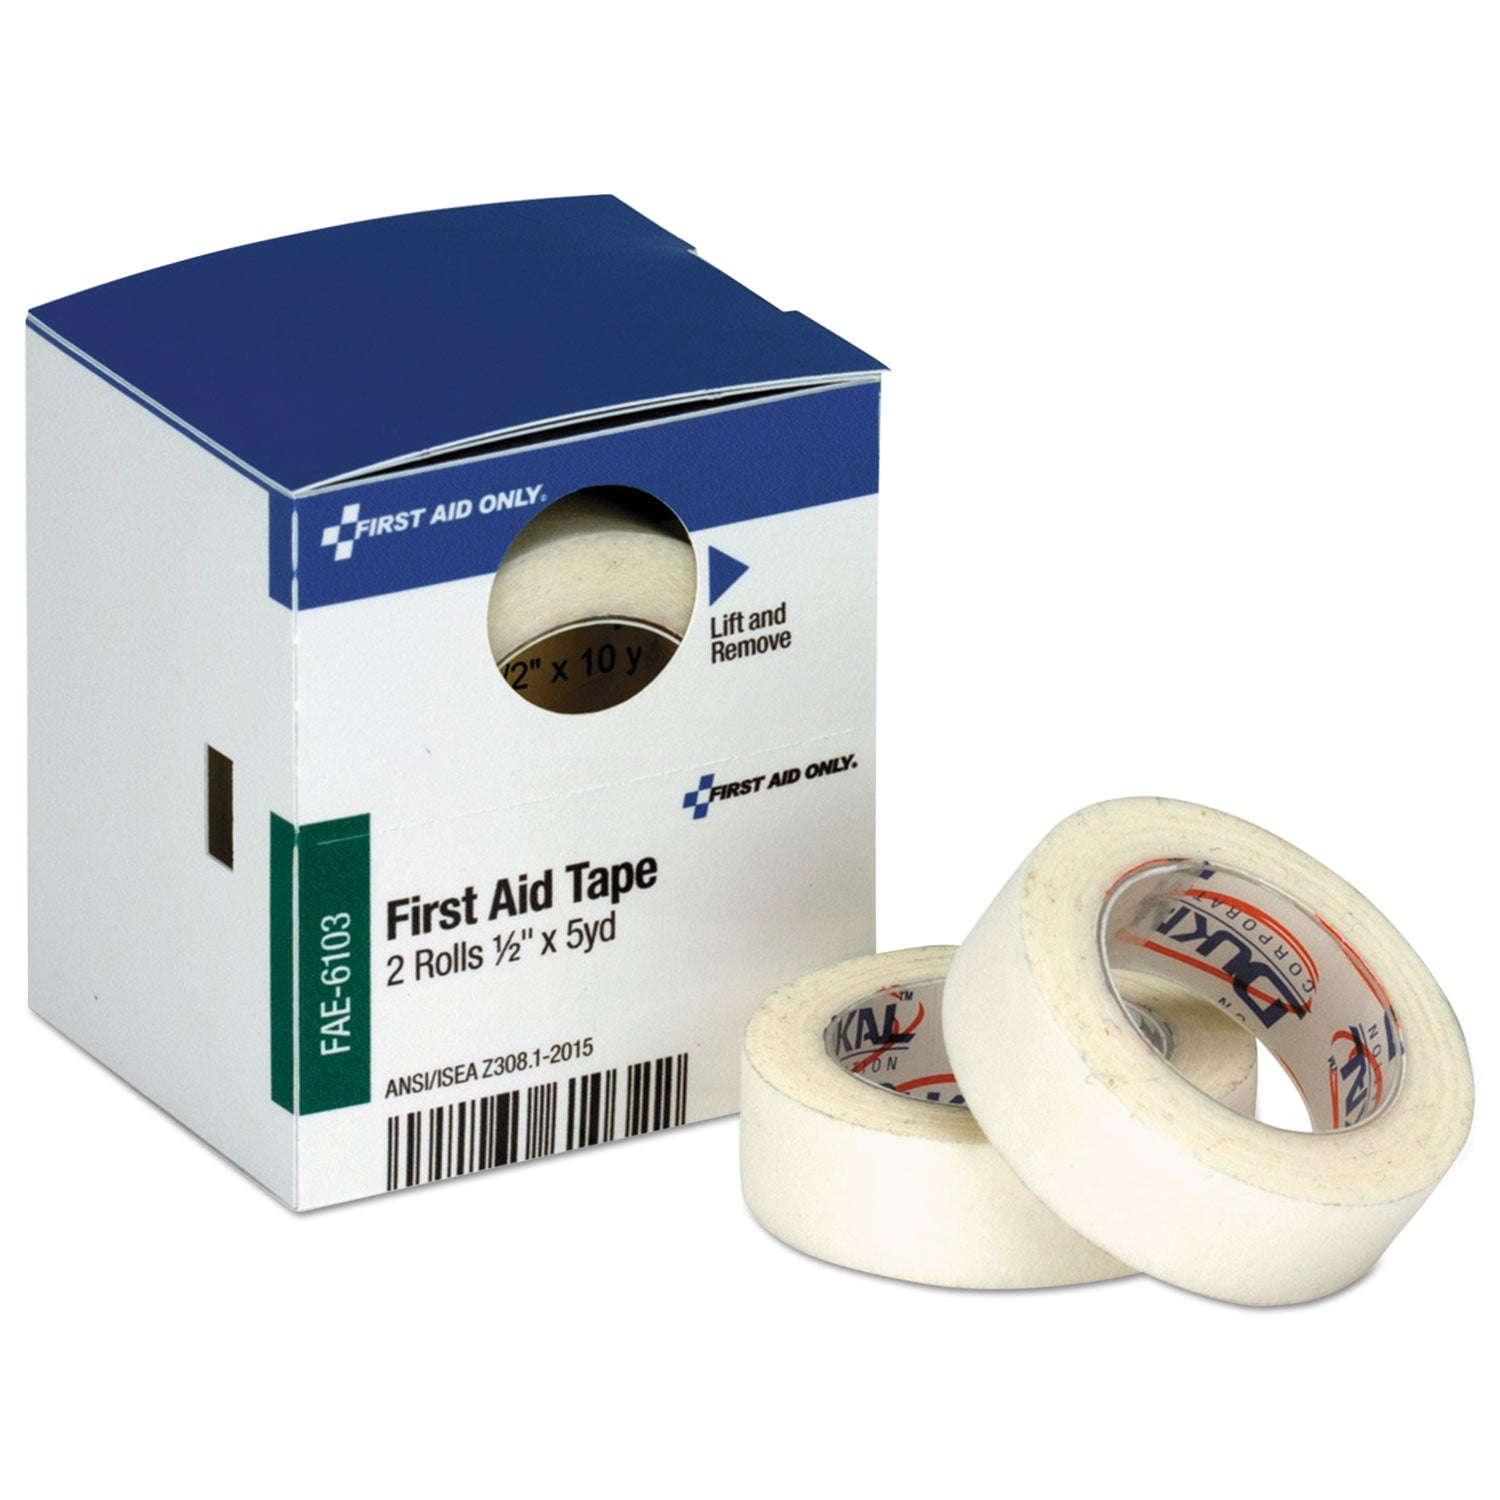 refill-for-smartcompliance-general-business-cabinet-first-aid-tape-1-2-x-5-yd-2-roll-box_faofae6103 - 1